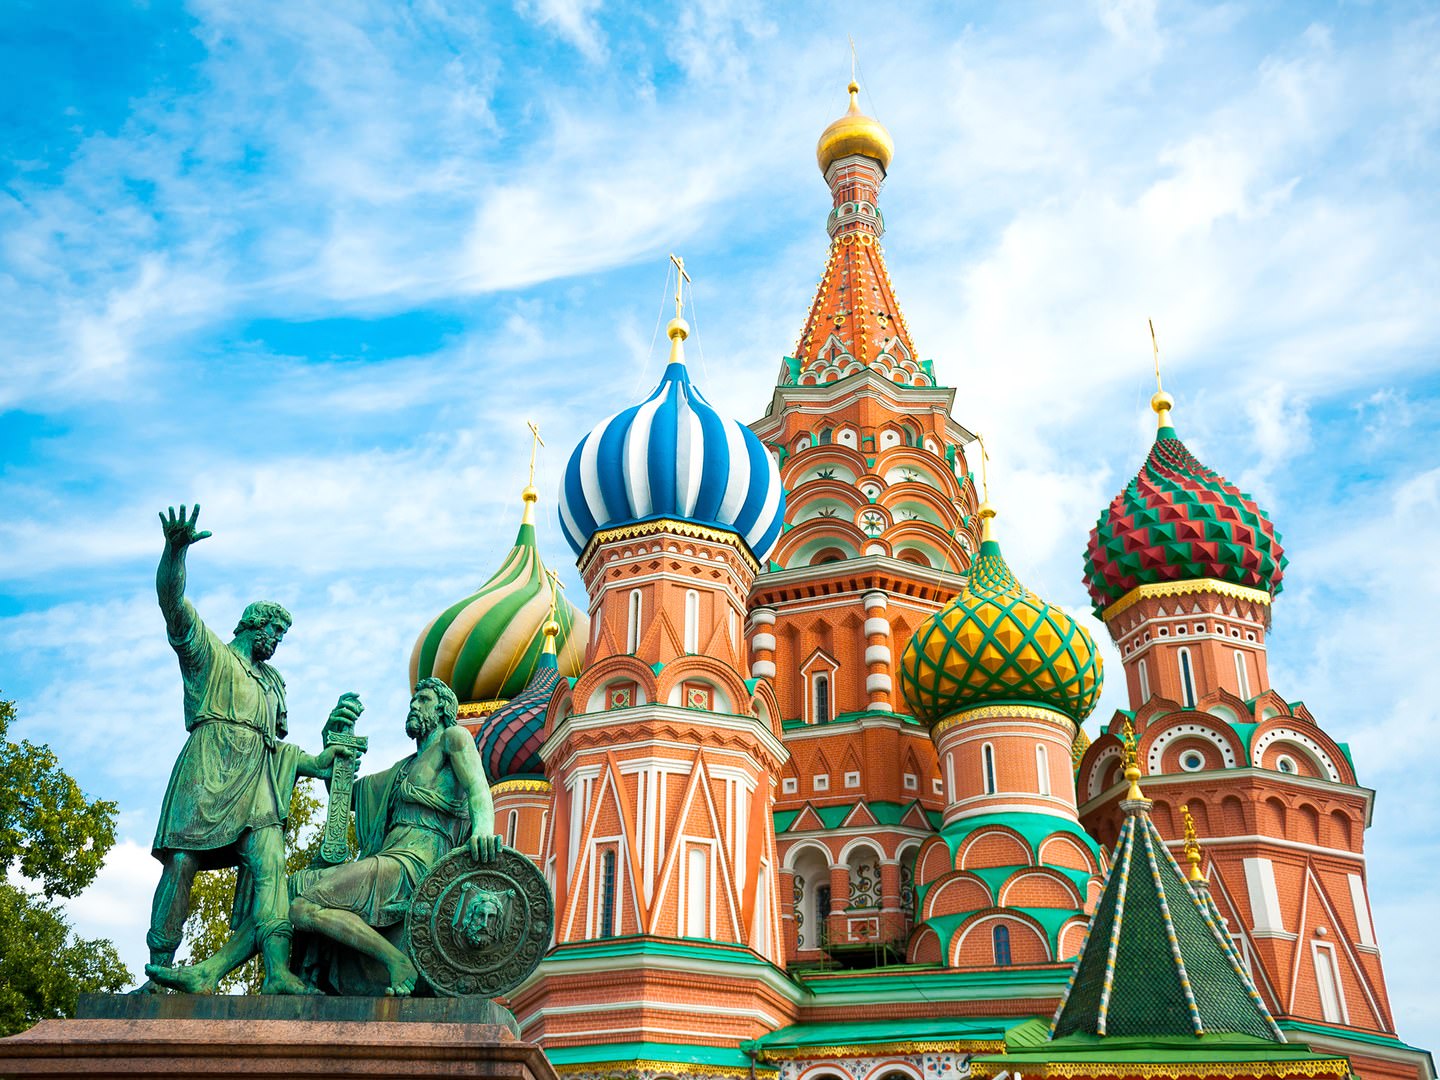 If You Can Name Just 12/20 Countries by Their Famous Landmark, I’ll Be Really Impressed St. Basil's Cathedral, Moscow, Russia